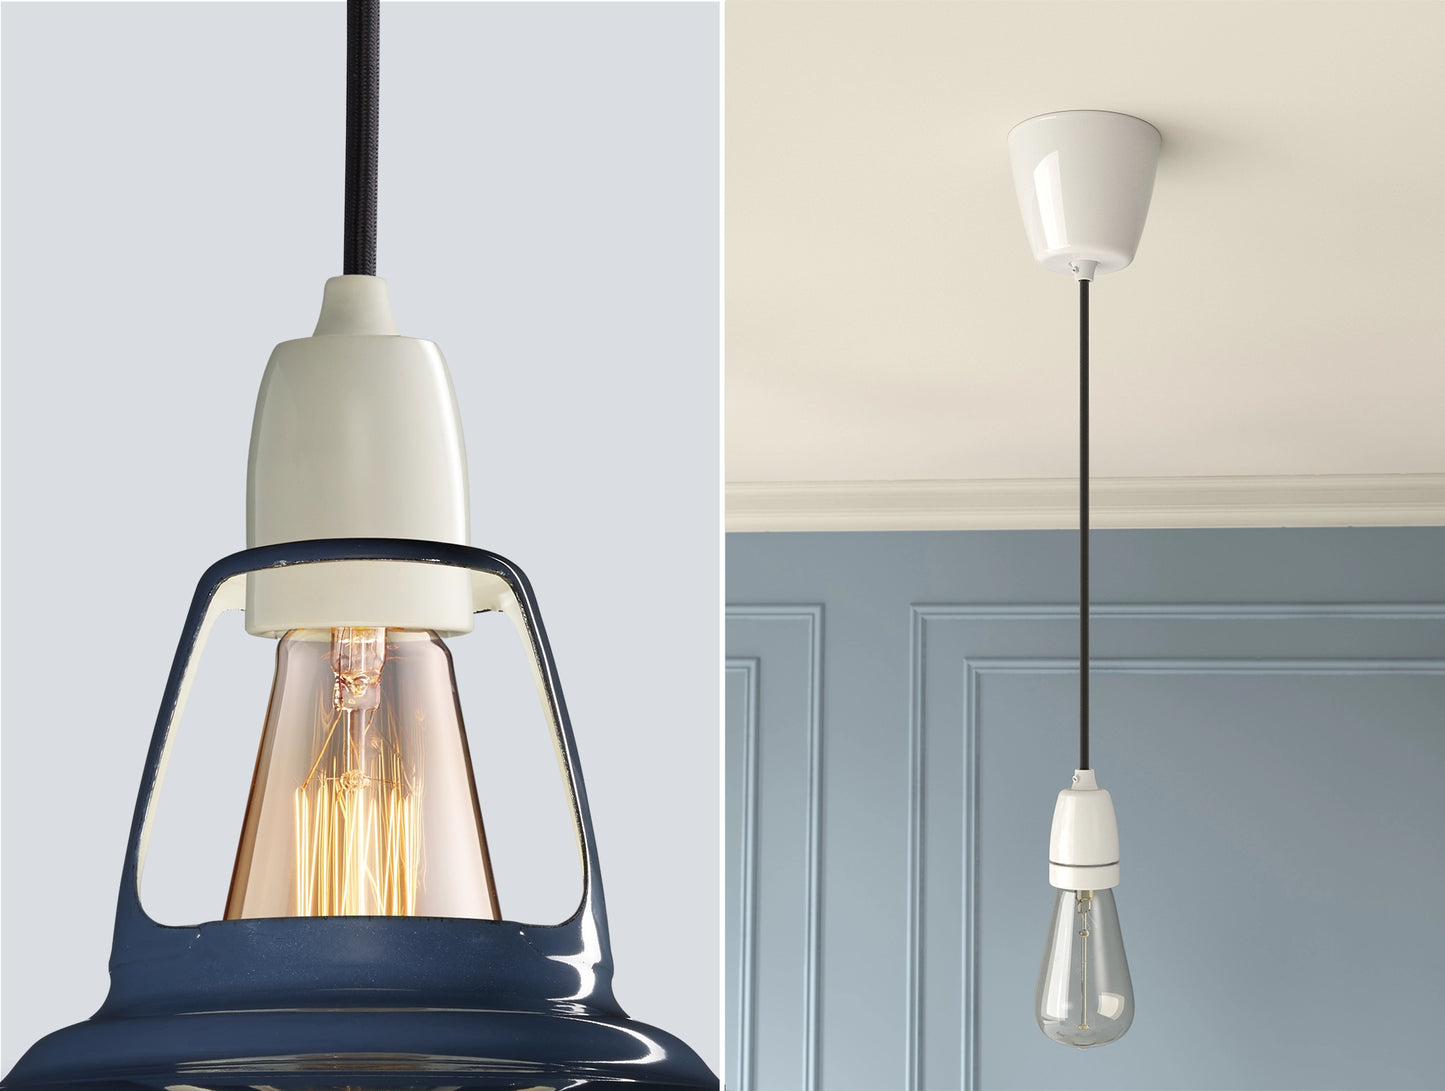 Close up of an E27 Porcelain suspension set on a Selvedge lampshade on the left. On the right, an E27 Porcelain pendant set with a lightbulb is hanging from the ceiling